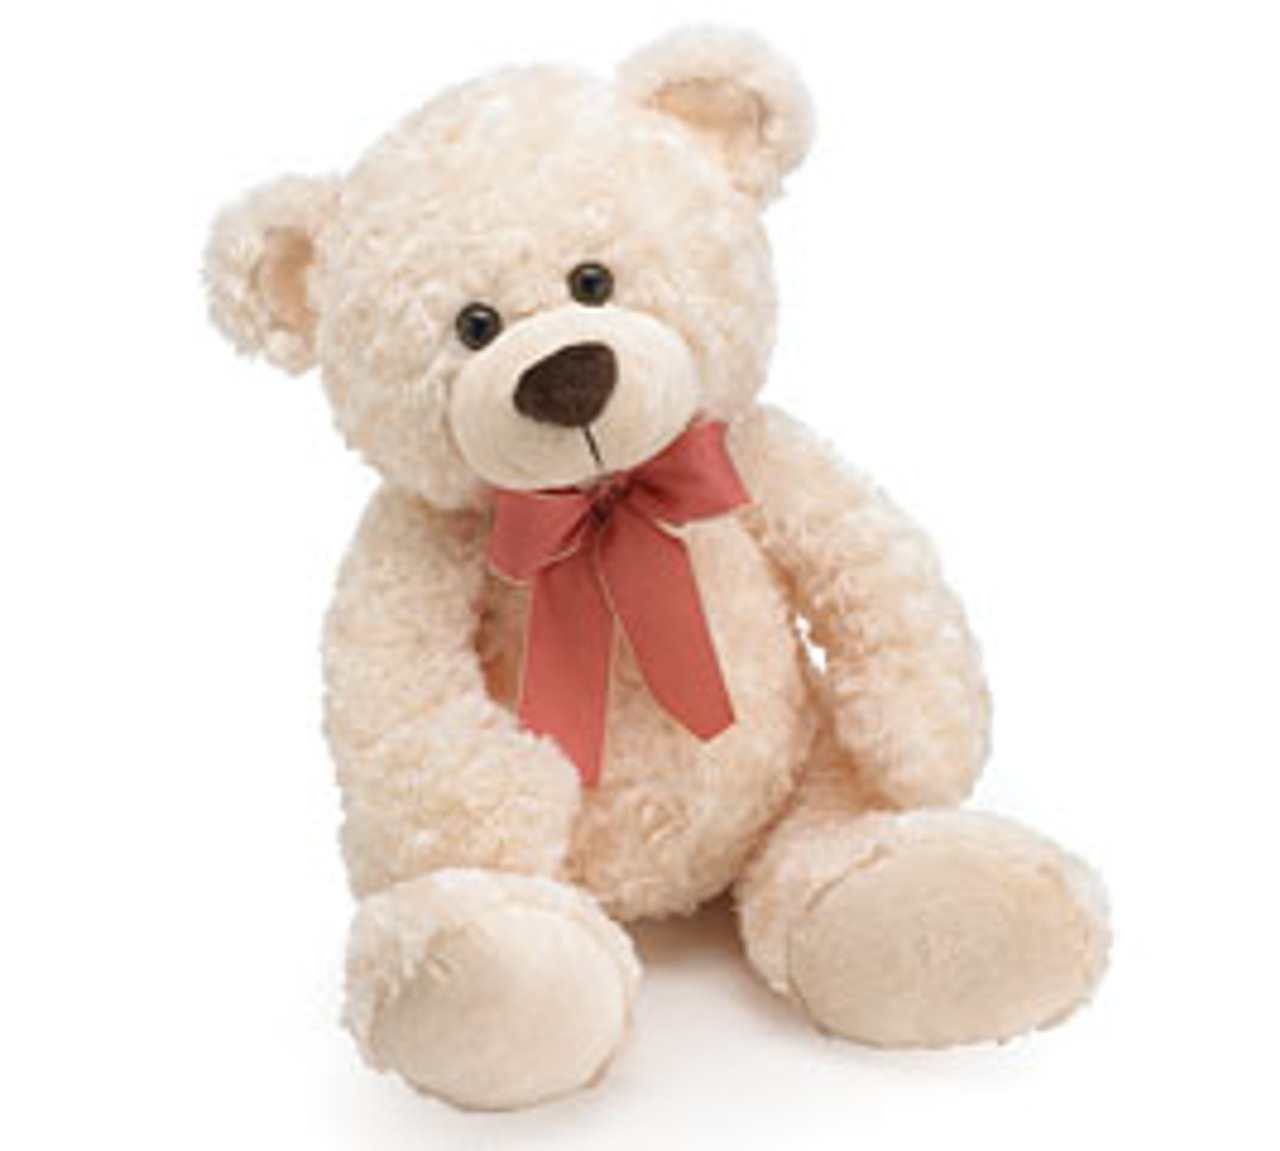 This is my teddy. Huggable медведь.